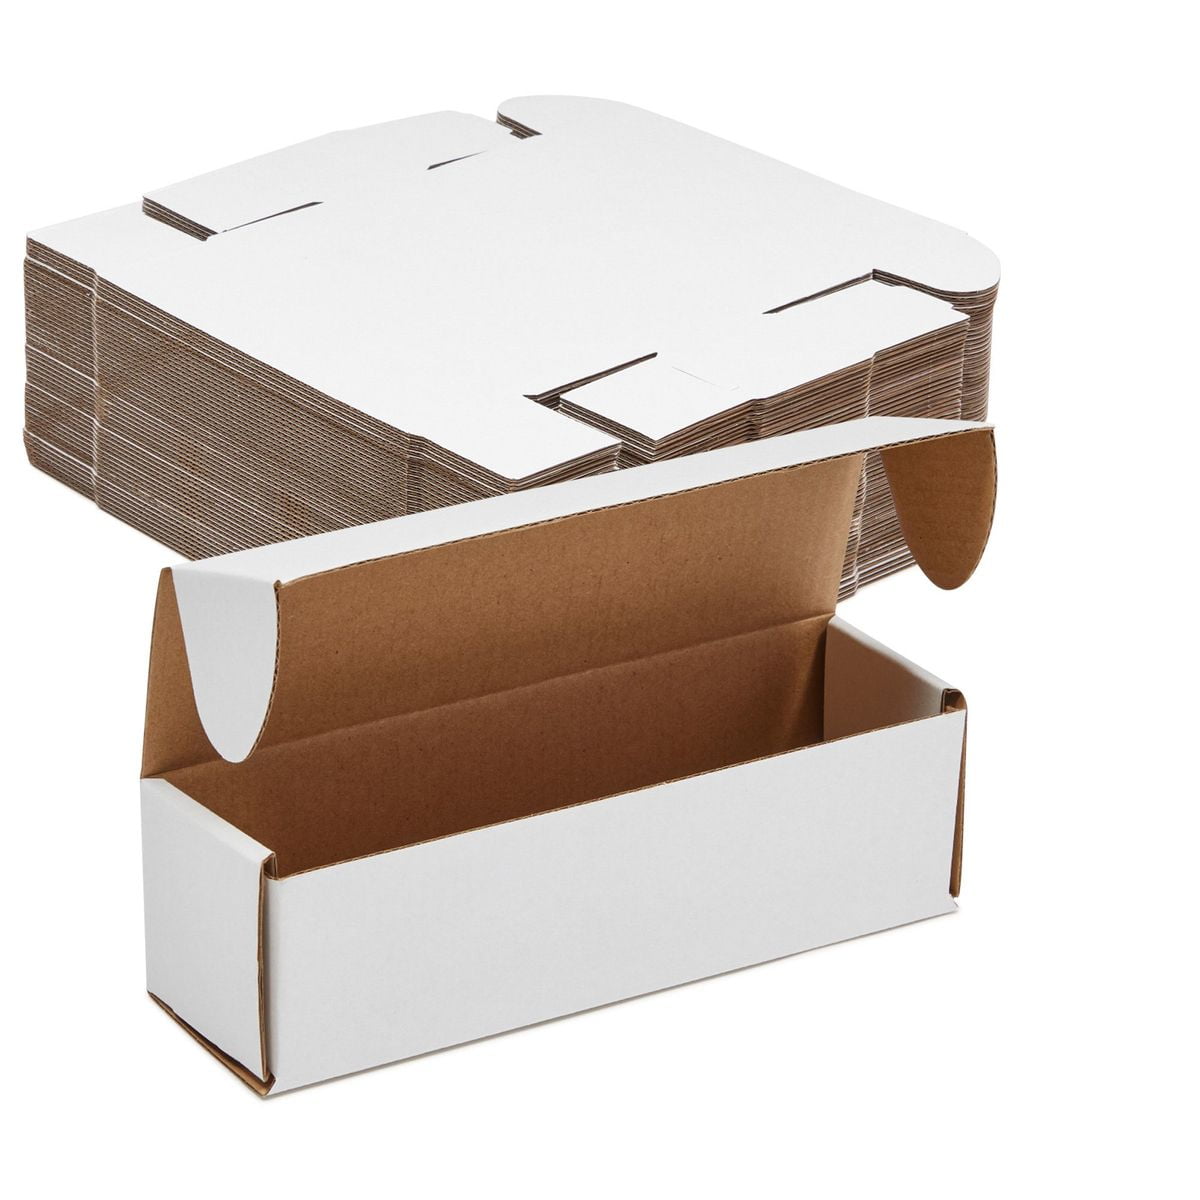 50 x Cardboard junior snack boxes hot food takeaway packaging chip boxes.